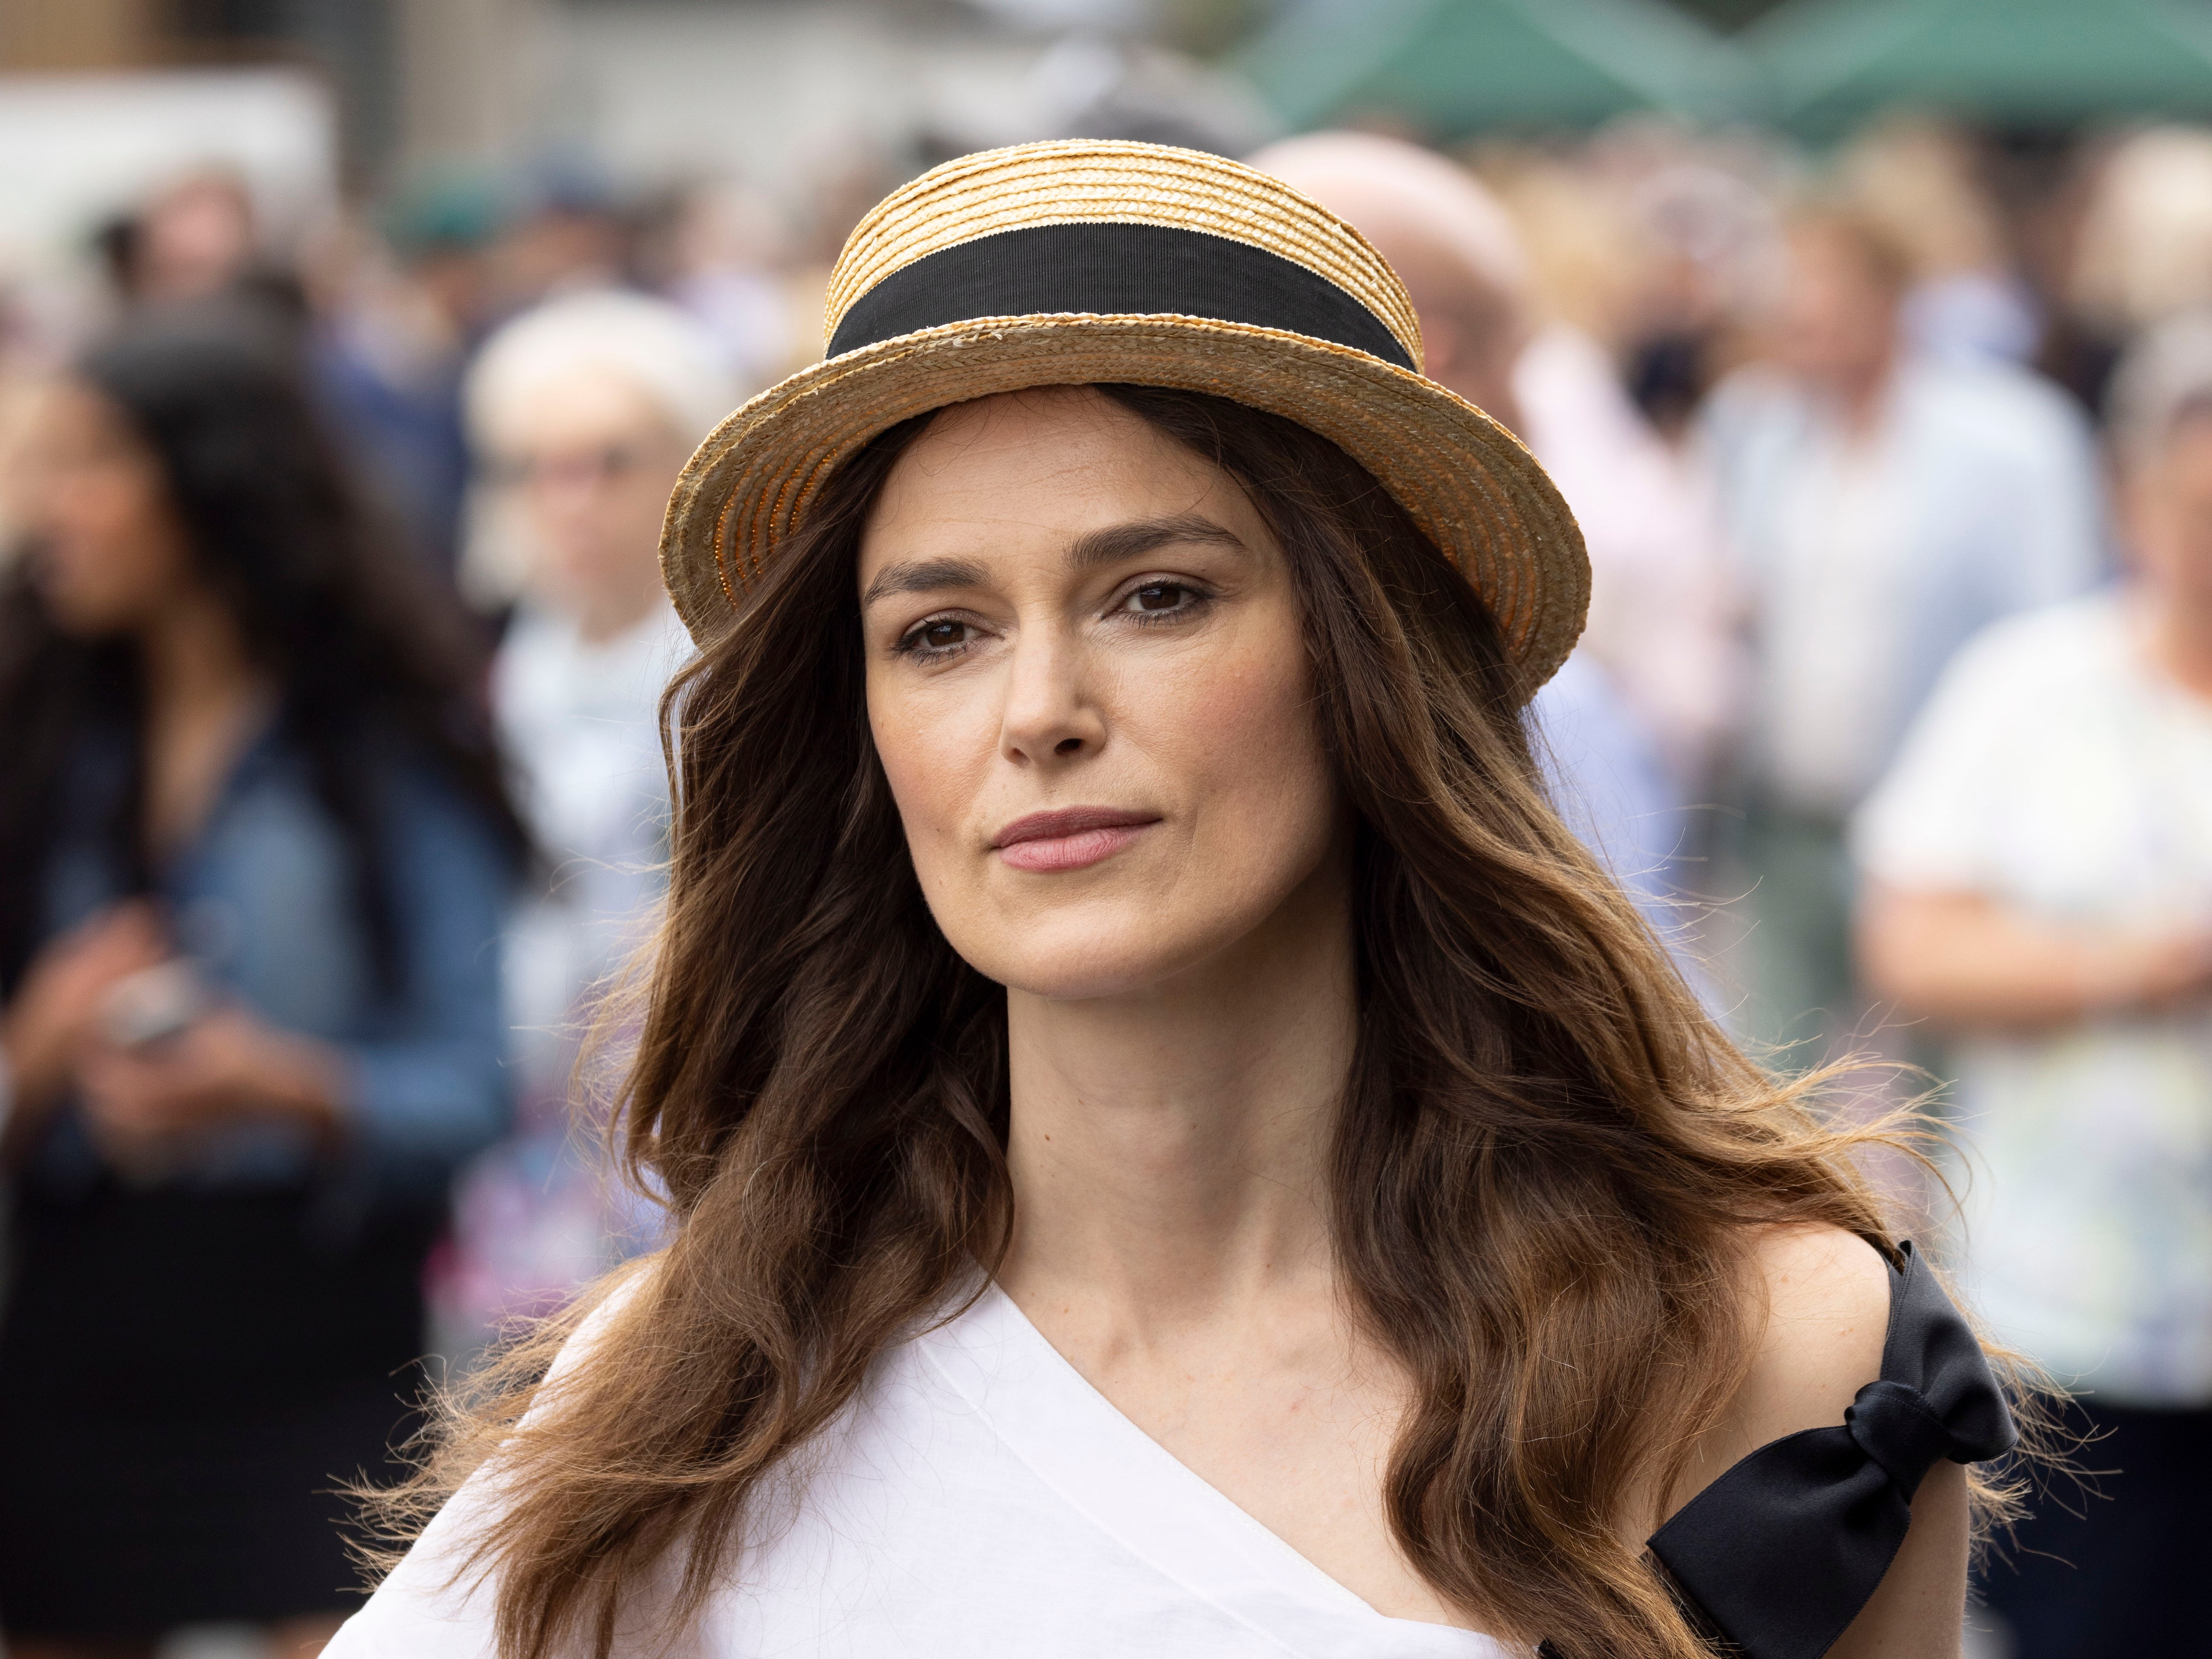 Keira Knightley Channels Our Favorite Children’s Book Heroine at Wimbledon